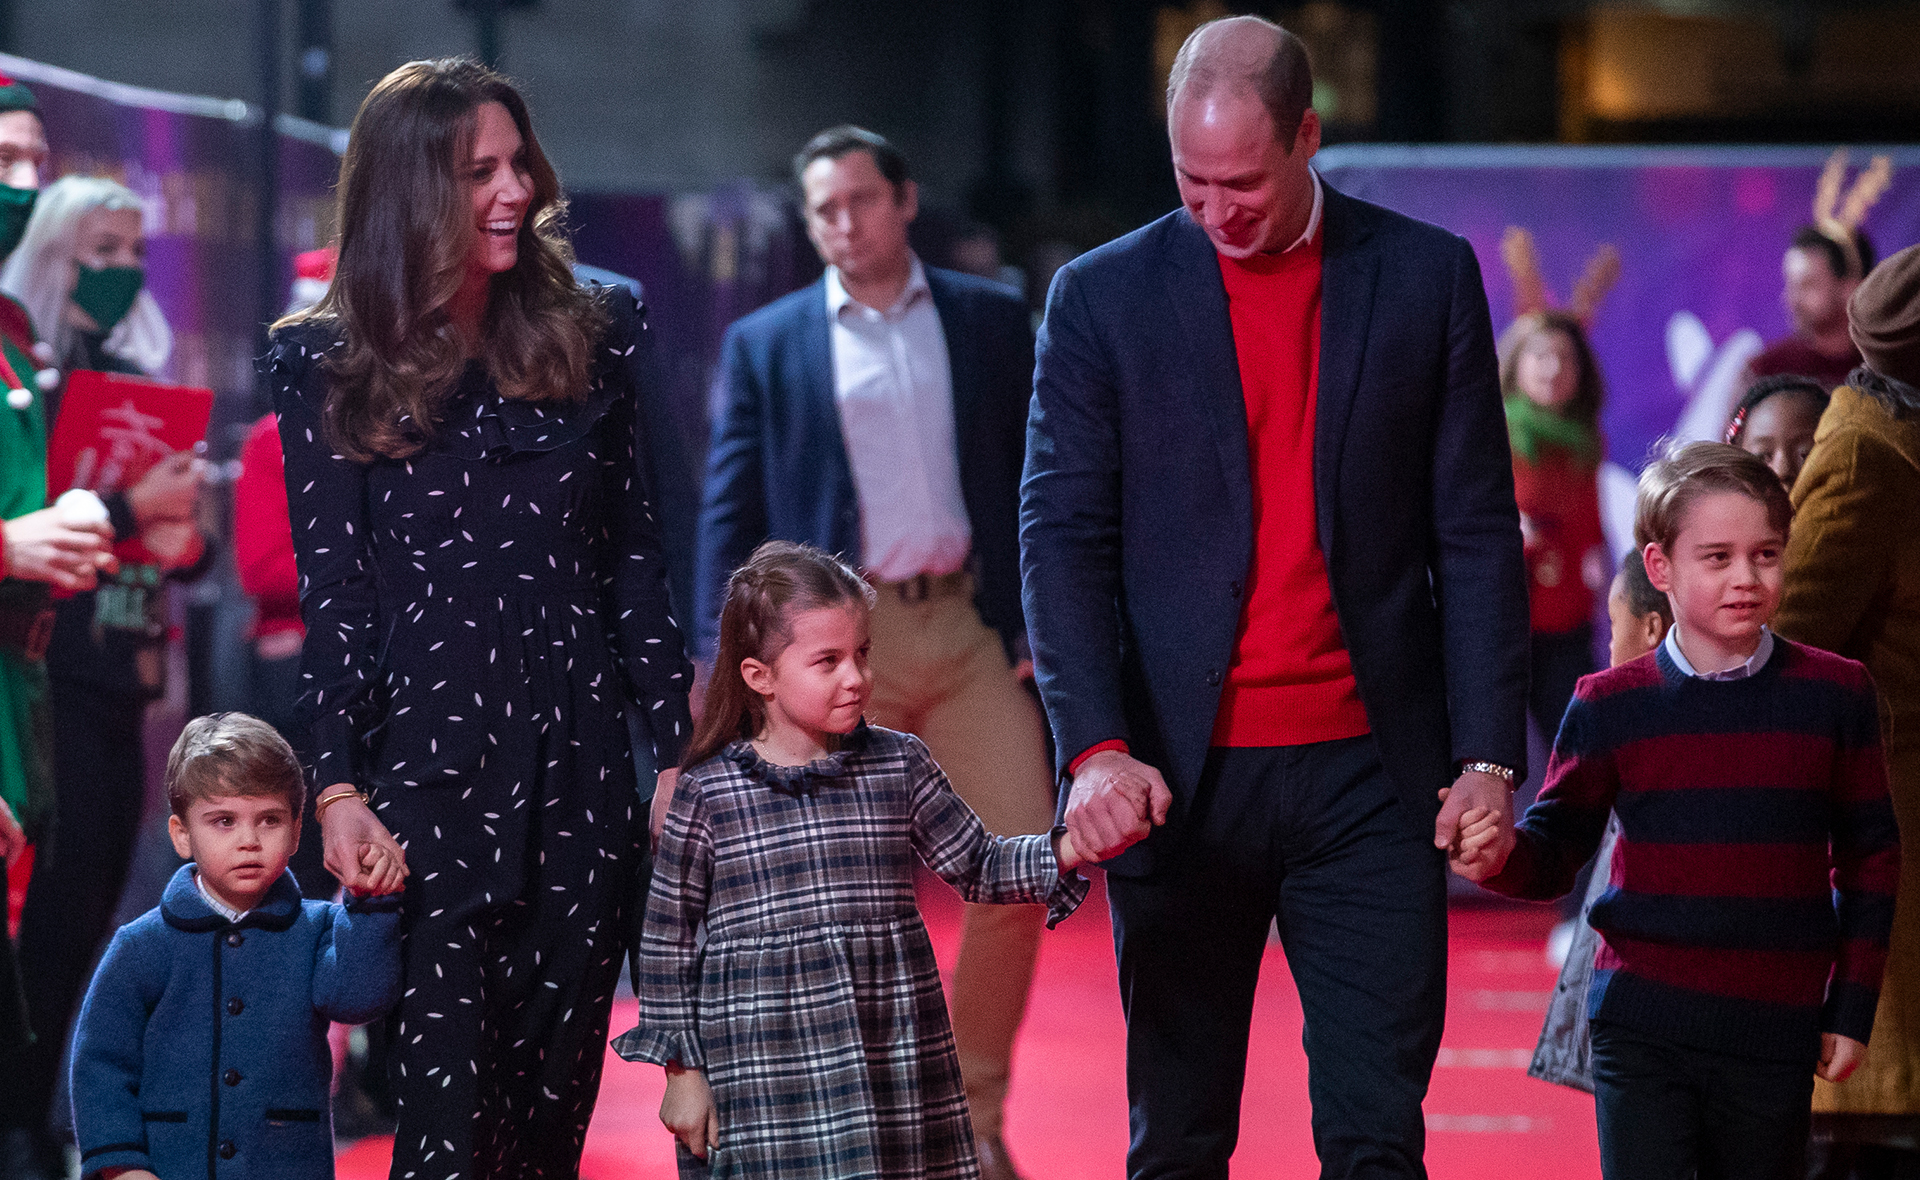 This is what Kate & William’s kids are getting up to while their parents travel Scotland on their royal tour